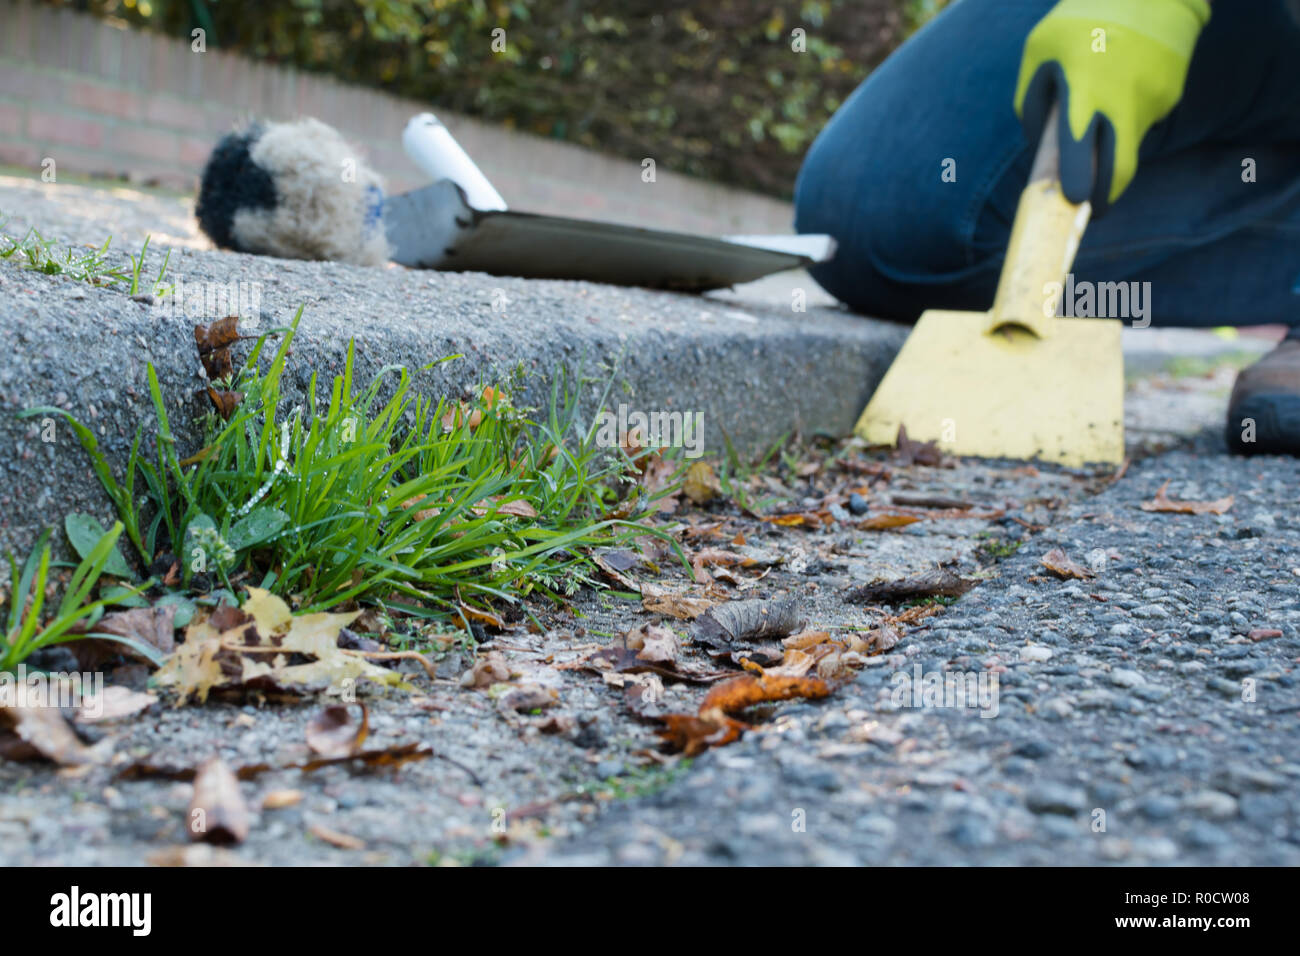 Man is cleaning the street gutter Stock Photo